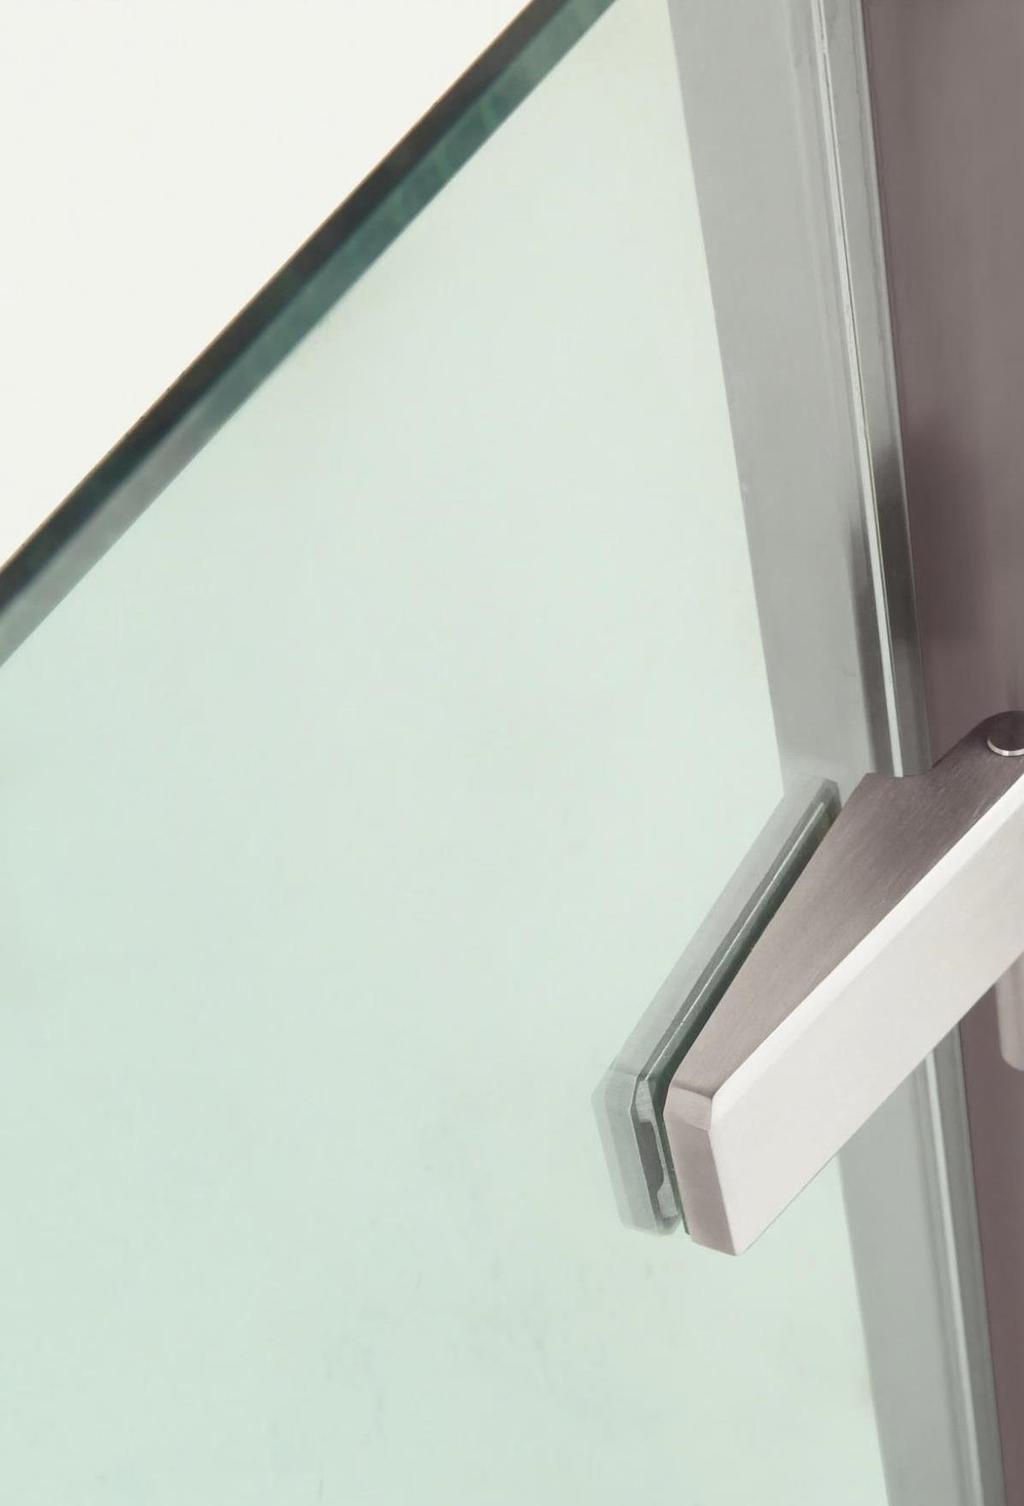 Häfele reintroduces its Range of Glass Fittings from the Startec Series which includes Häfele s Glass Door Hardware Range, Saddle Plate for DCL 21 Door Closer and Glass Door Sealing Systems! 1.